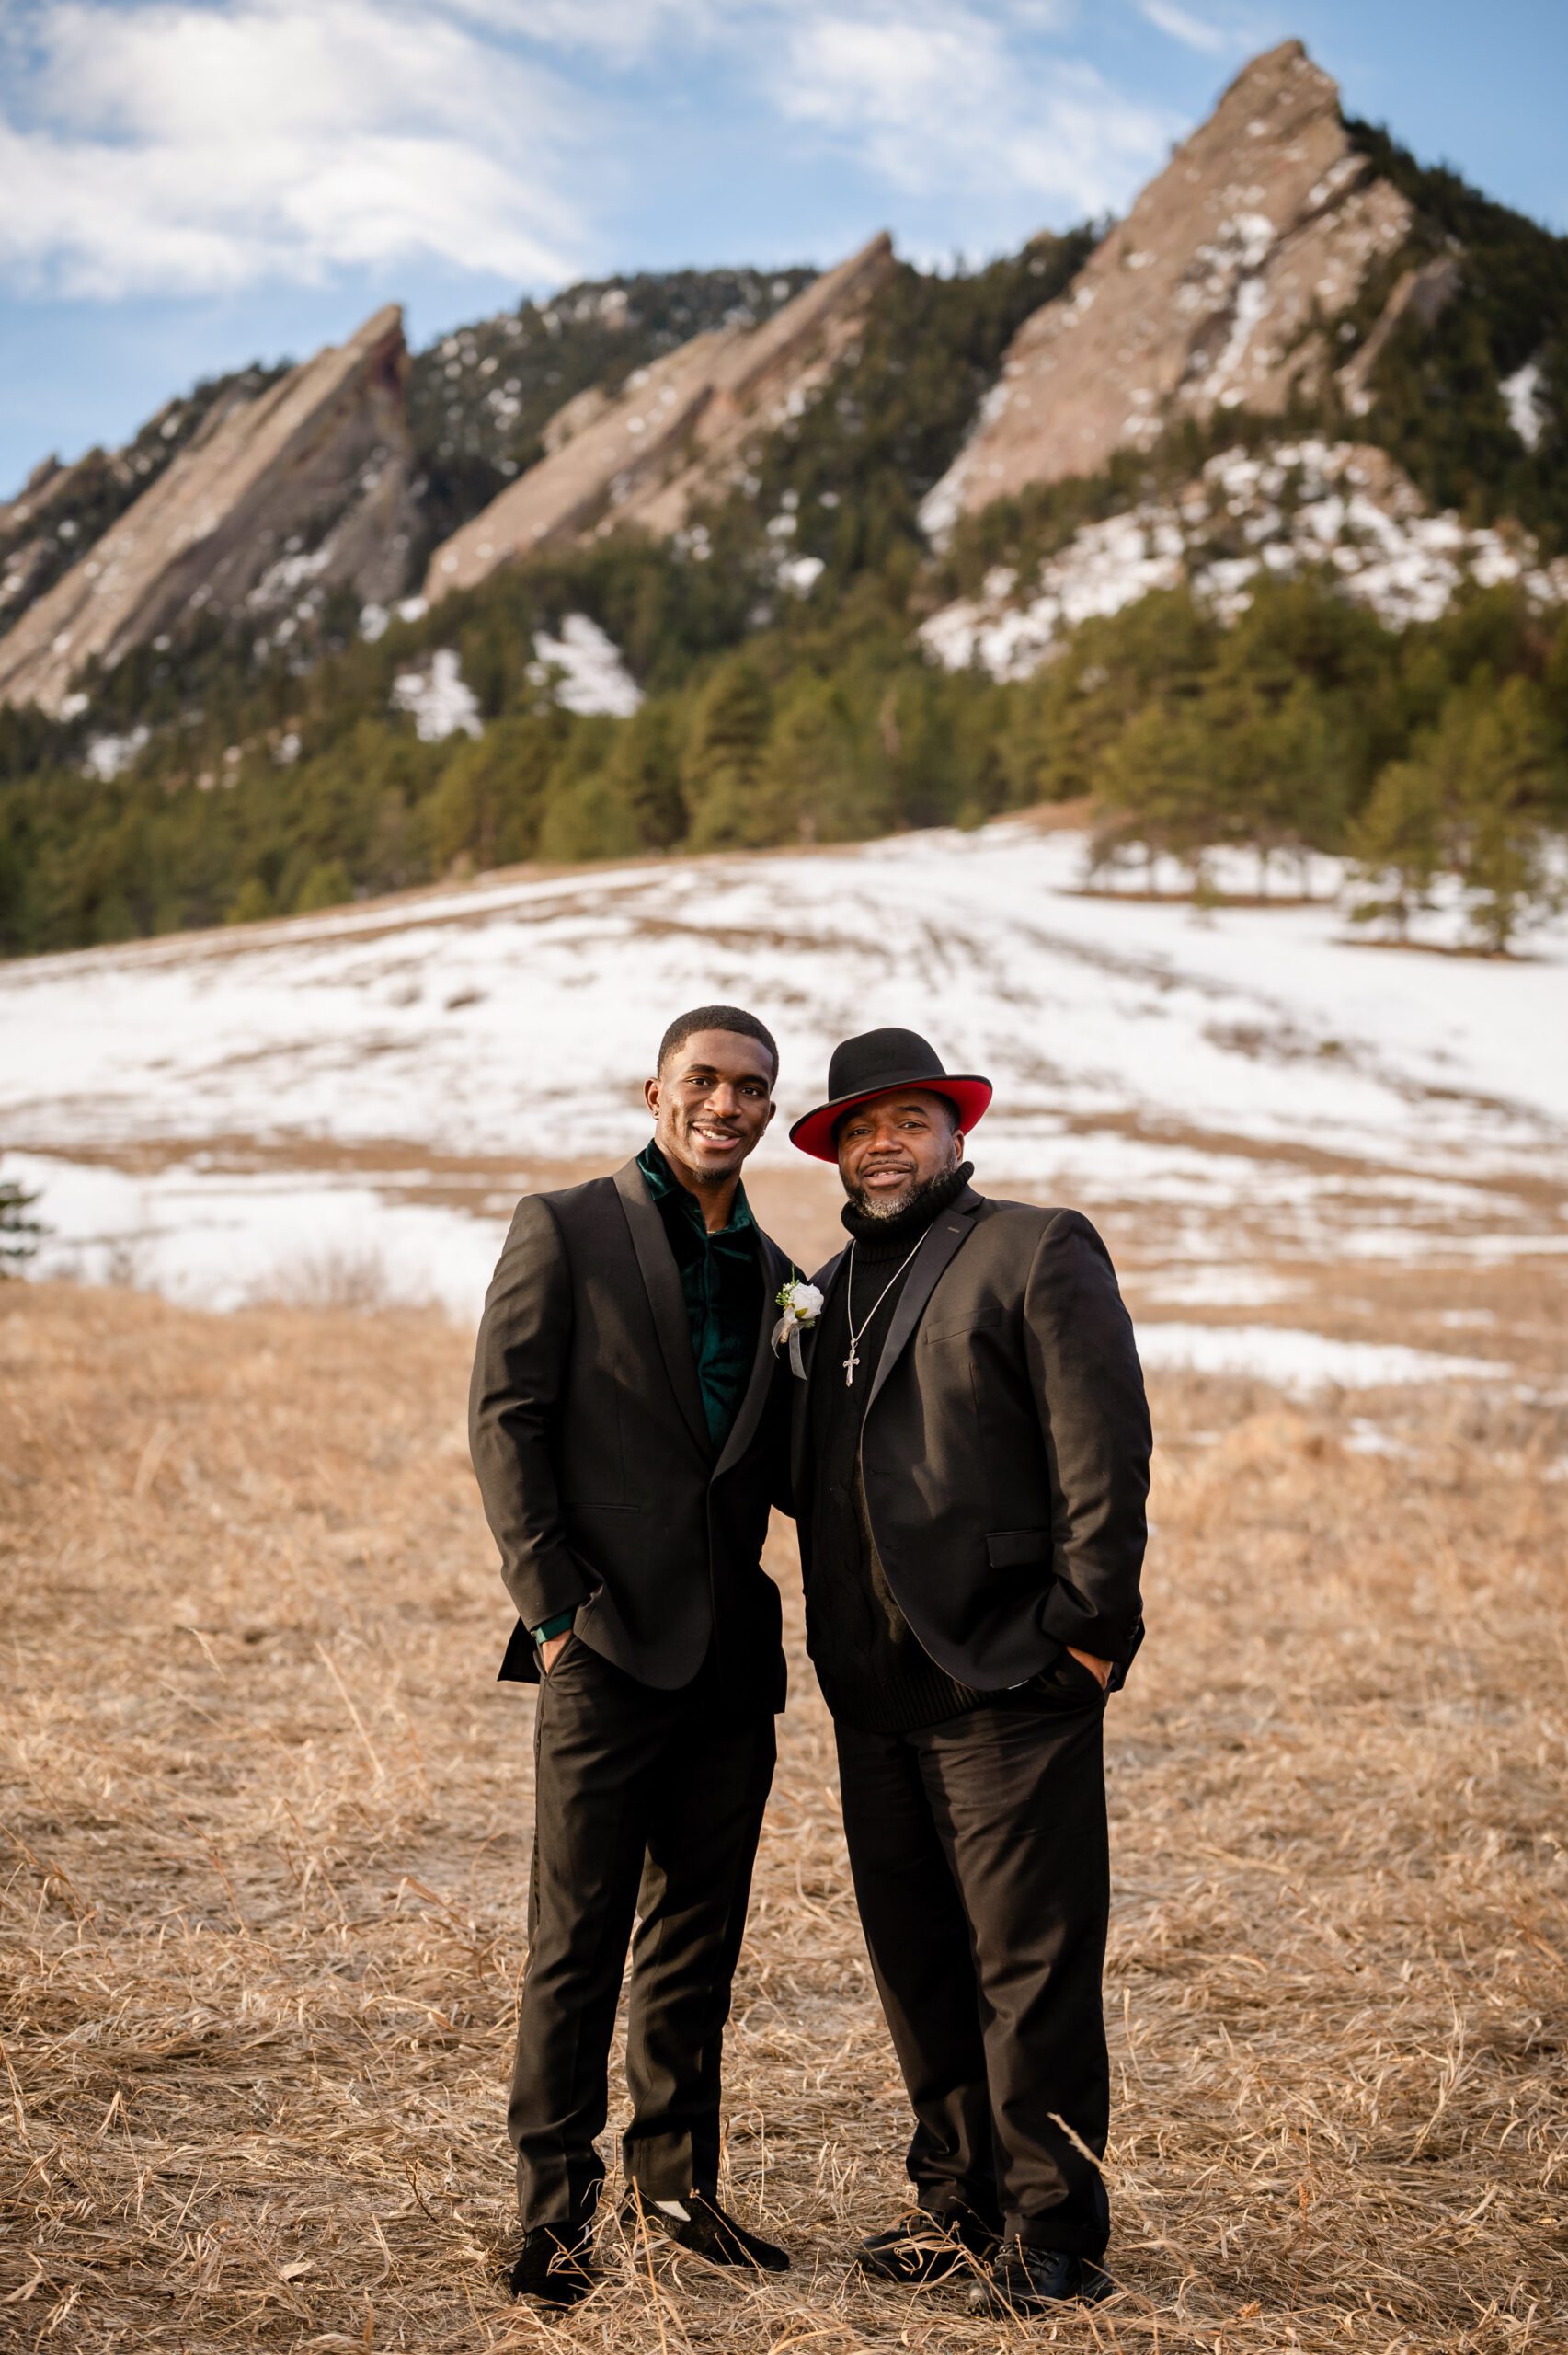 The groom and his father after the grooms Chautauqua Trail elopement.